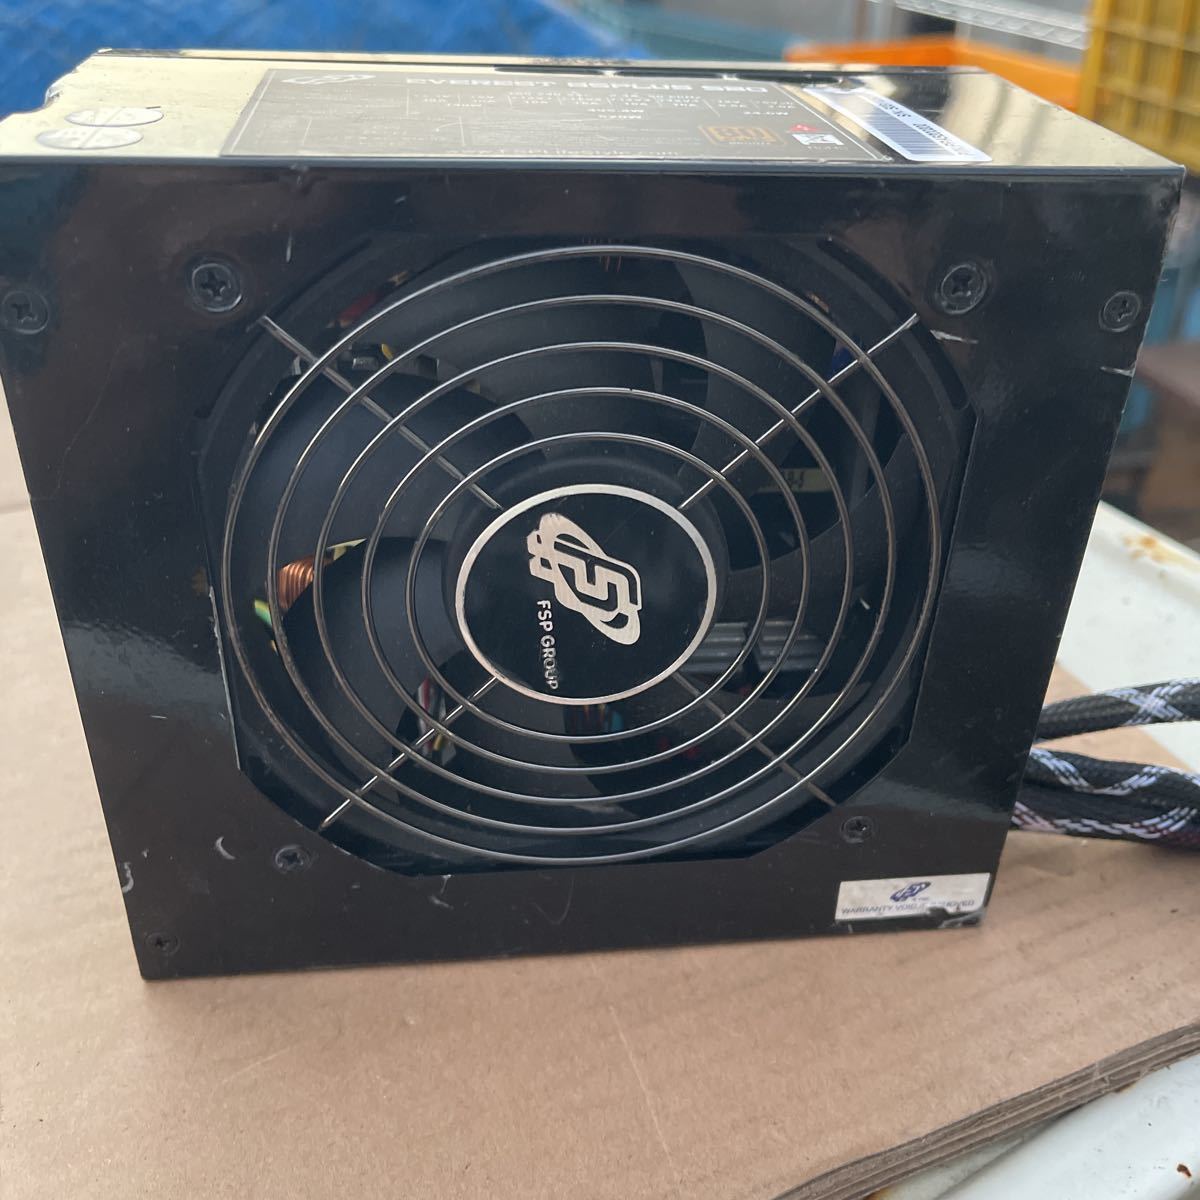 FSP GROUP EVEREST 85PLUS 520 520W power supply BOX power supply unit operation ok attached code no 